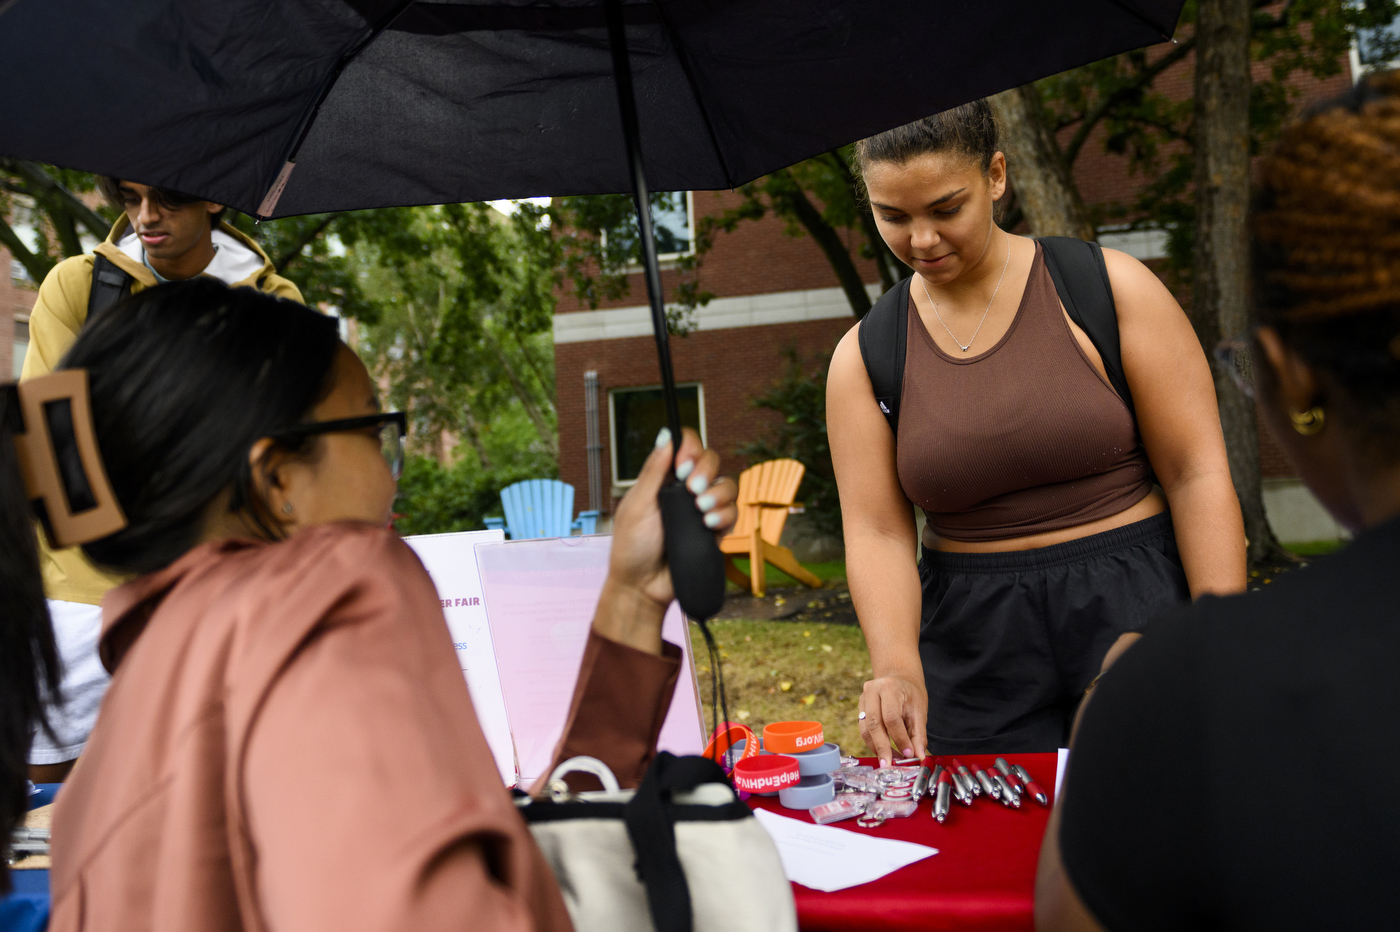 Student underneath a black umbrella approaches a table at the volunteer fair. 